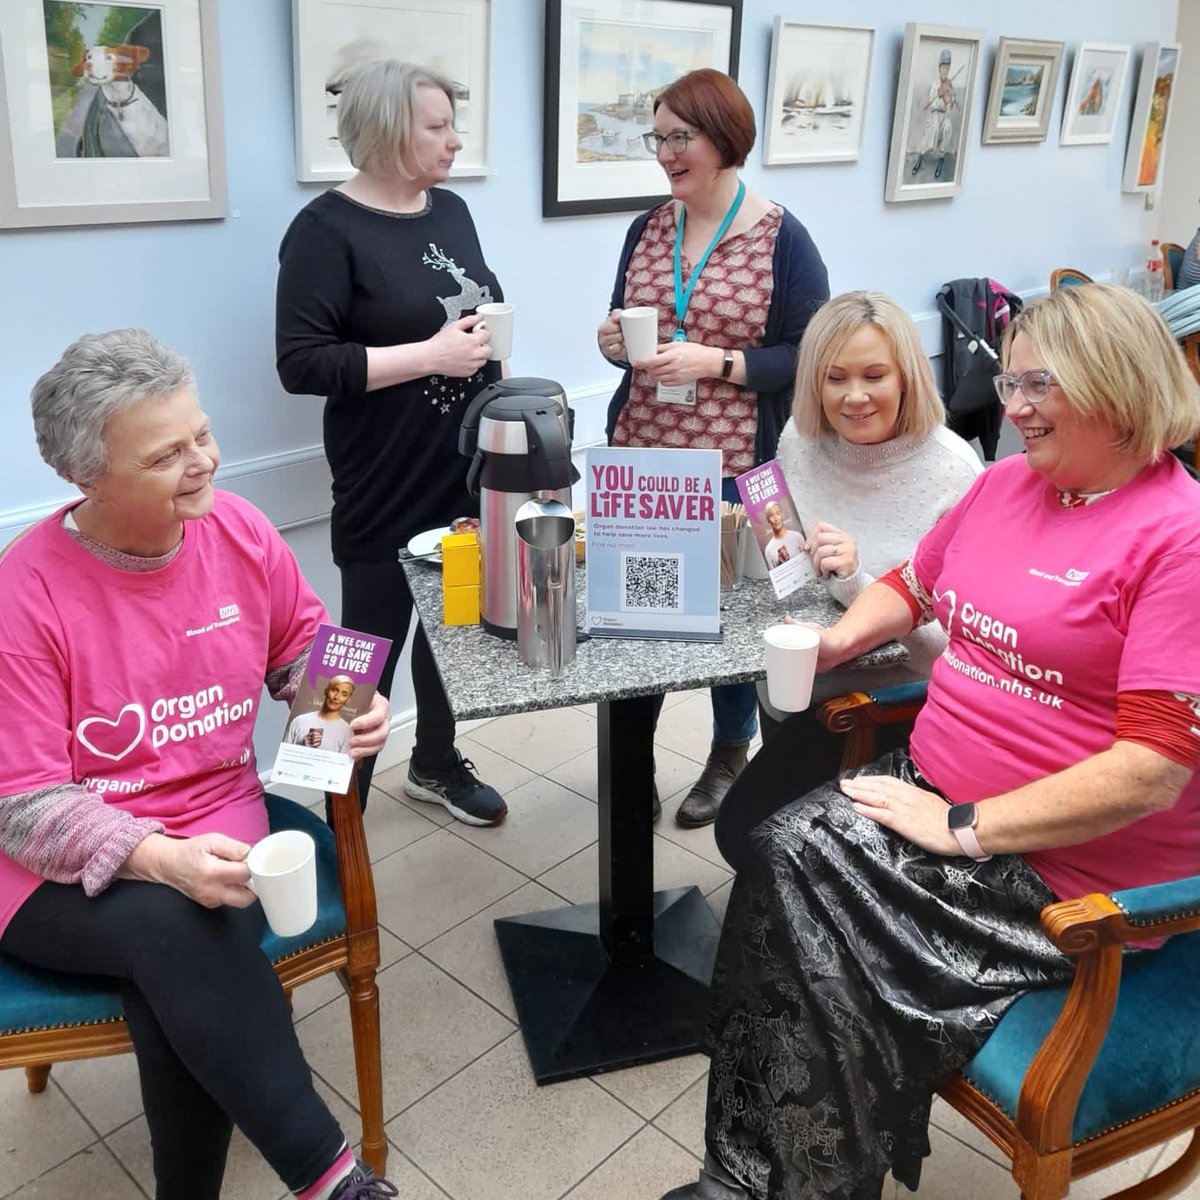 Northern Ireland Kidney Research Fund representatives Susan & Alison out and about today for Organ Donation Discussion Day encouraging people to #HaveTheChat 💗
We joined Northern Health and Social Care Trust Renal Unit for the Renal Rendezvous 🕯️

#OrganDonation #giftoflife